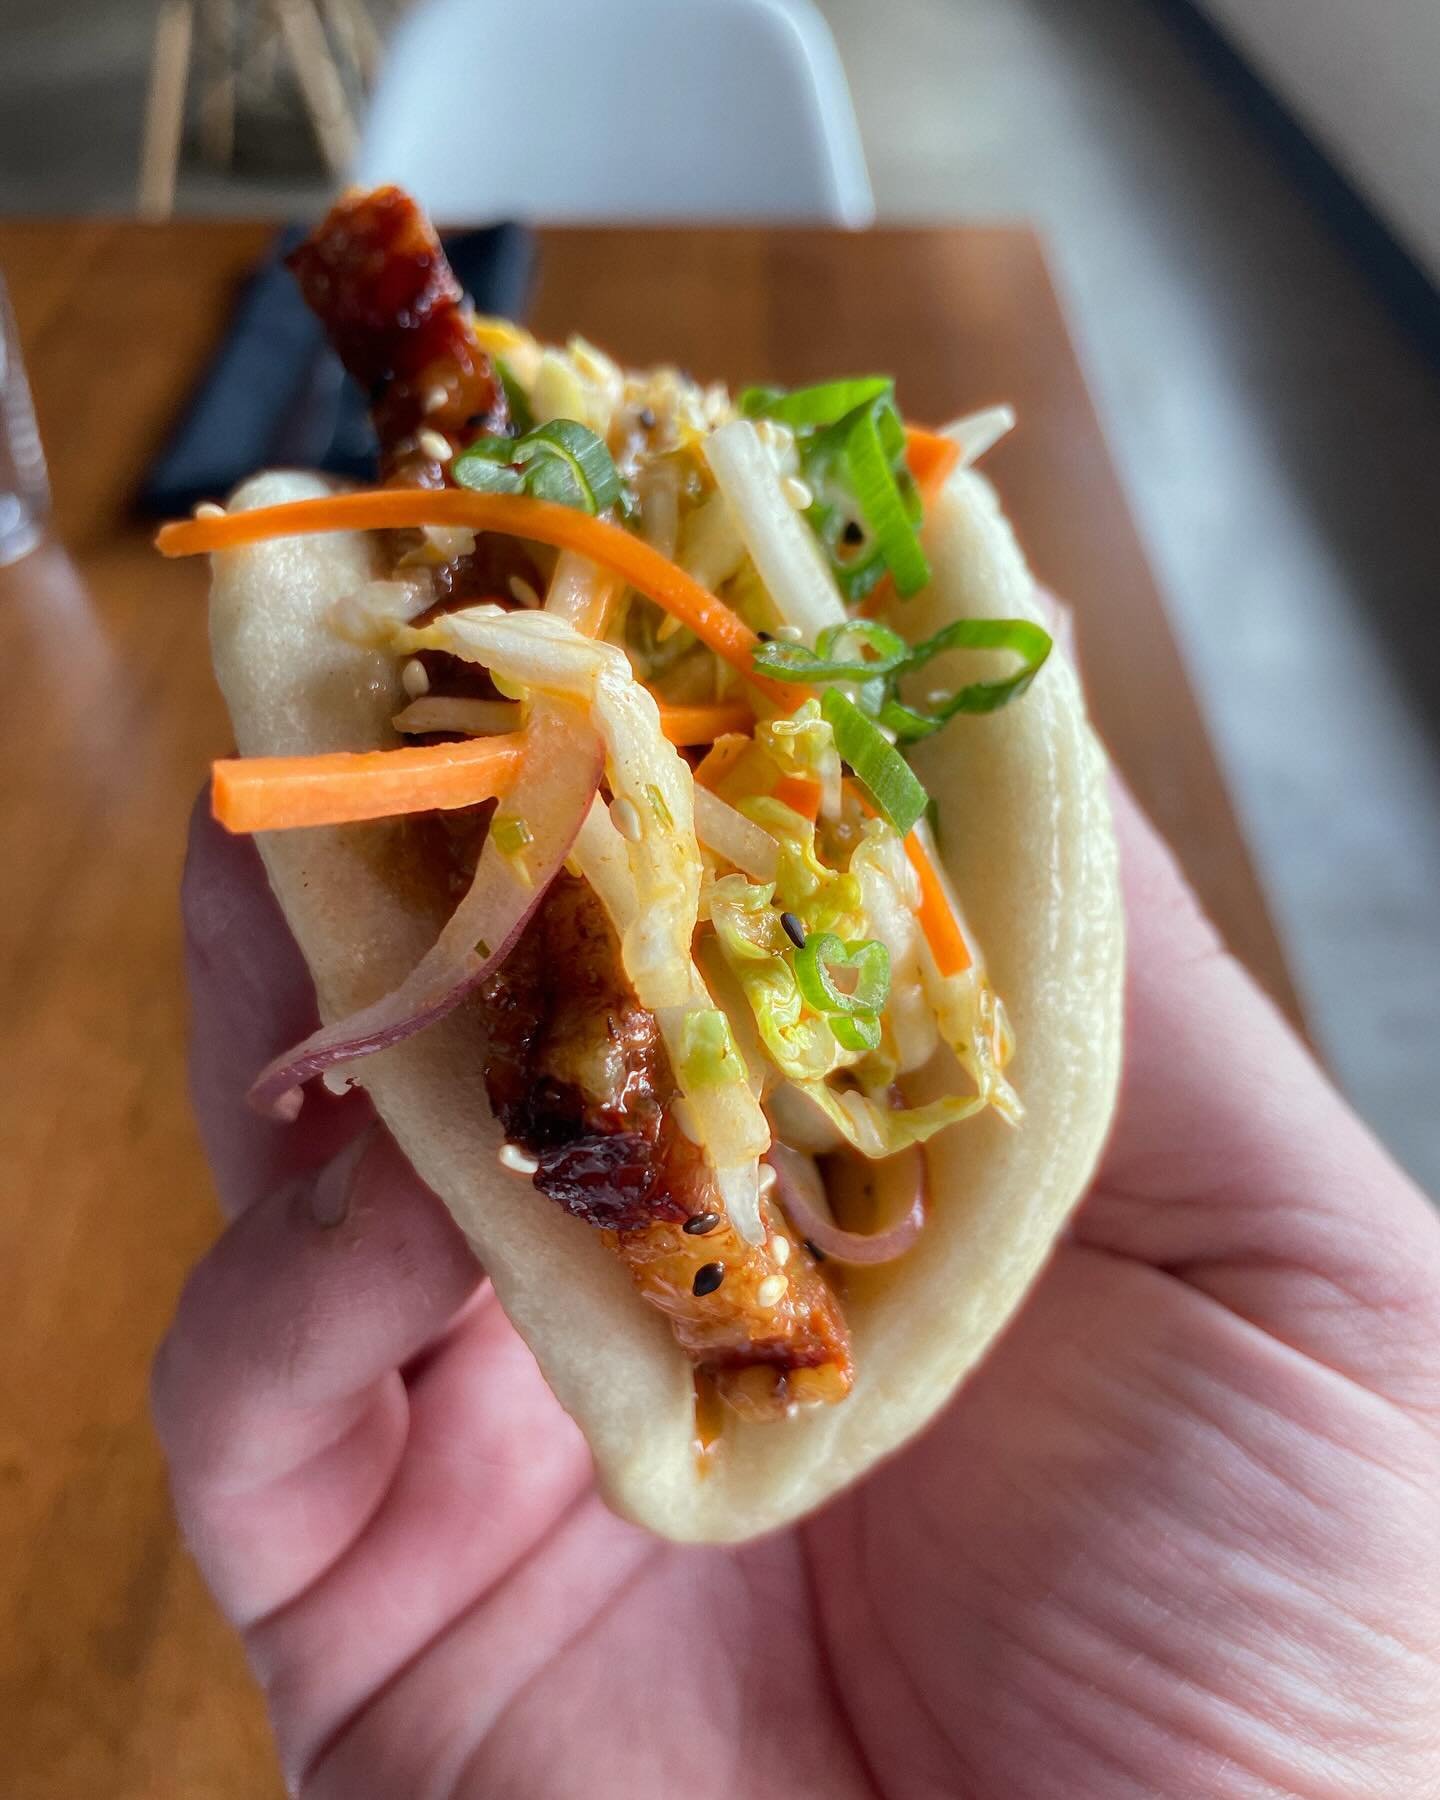 POV: you ordered the Pork Belly Bao with no regrets. Open tonight, 5pm-9pm!

#porkbelly #baobuns #goodfood #fromscratch #craftcocktails #nightmoves #moonlighter #indianafood #southbendfood #dtsouthbend